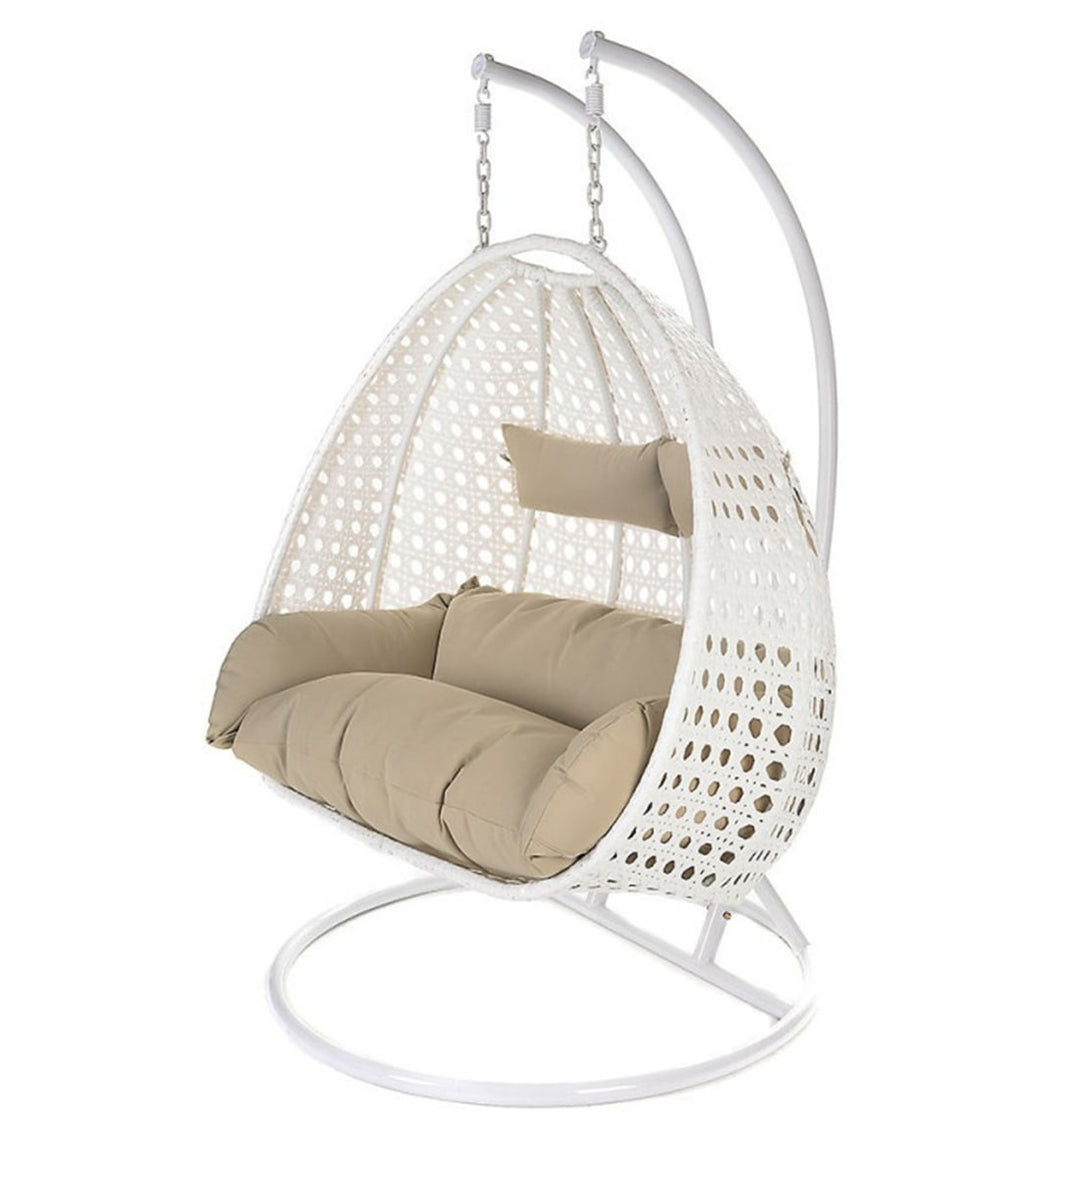 Lia Double Seater Hanging Swing With Stand For Balcony , Garden Swing (White)